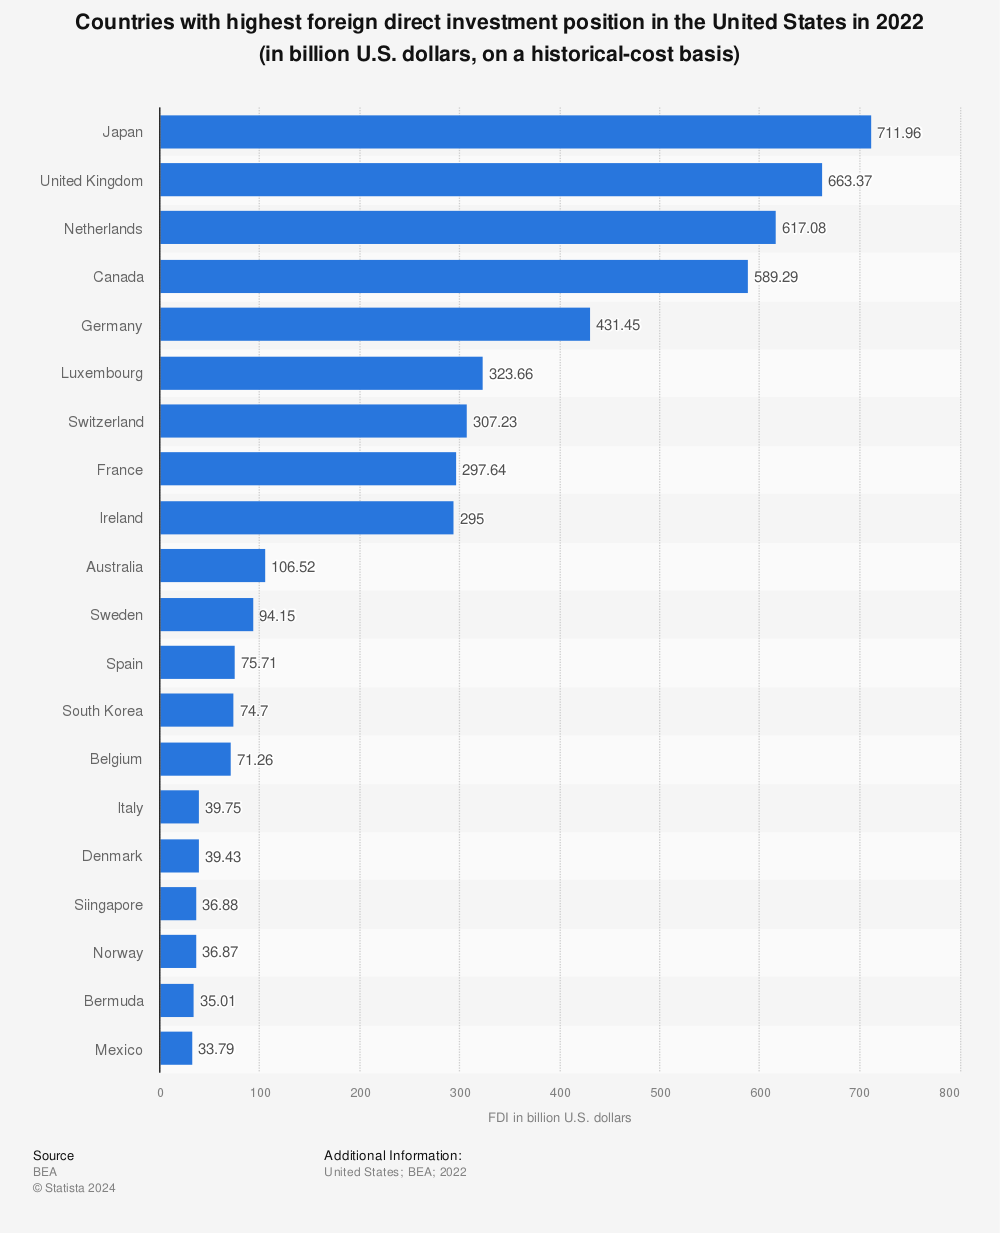 Statistic: Countries with highest foreign direct investment (FDI) position in the United States in 2021 (in billion U.S. dollars, on a historical-cost basis) | Statista